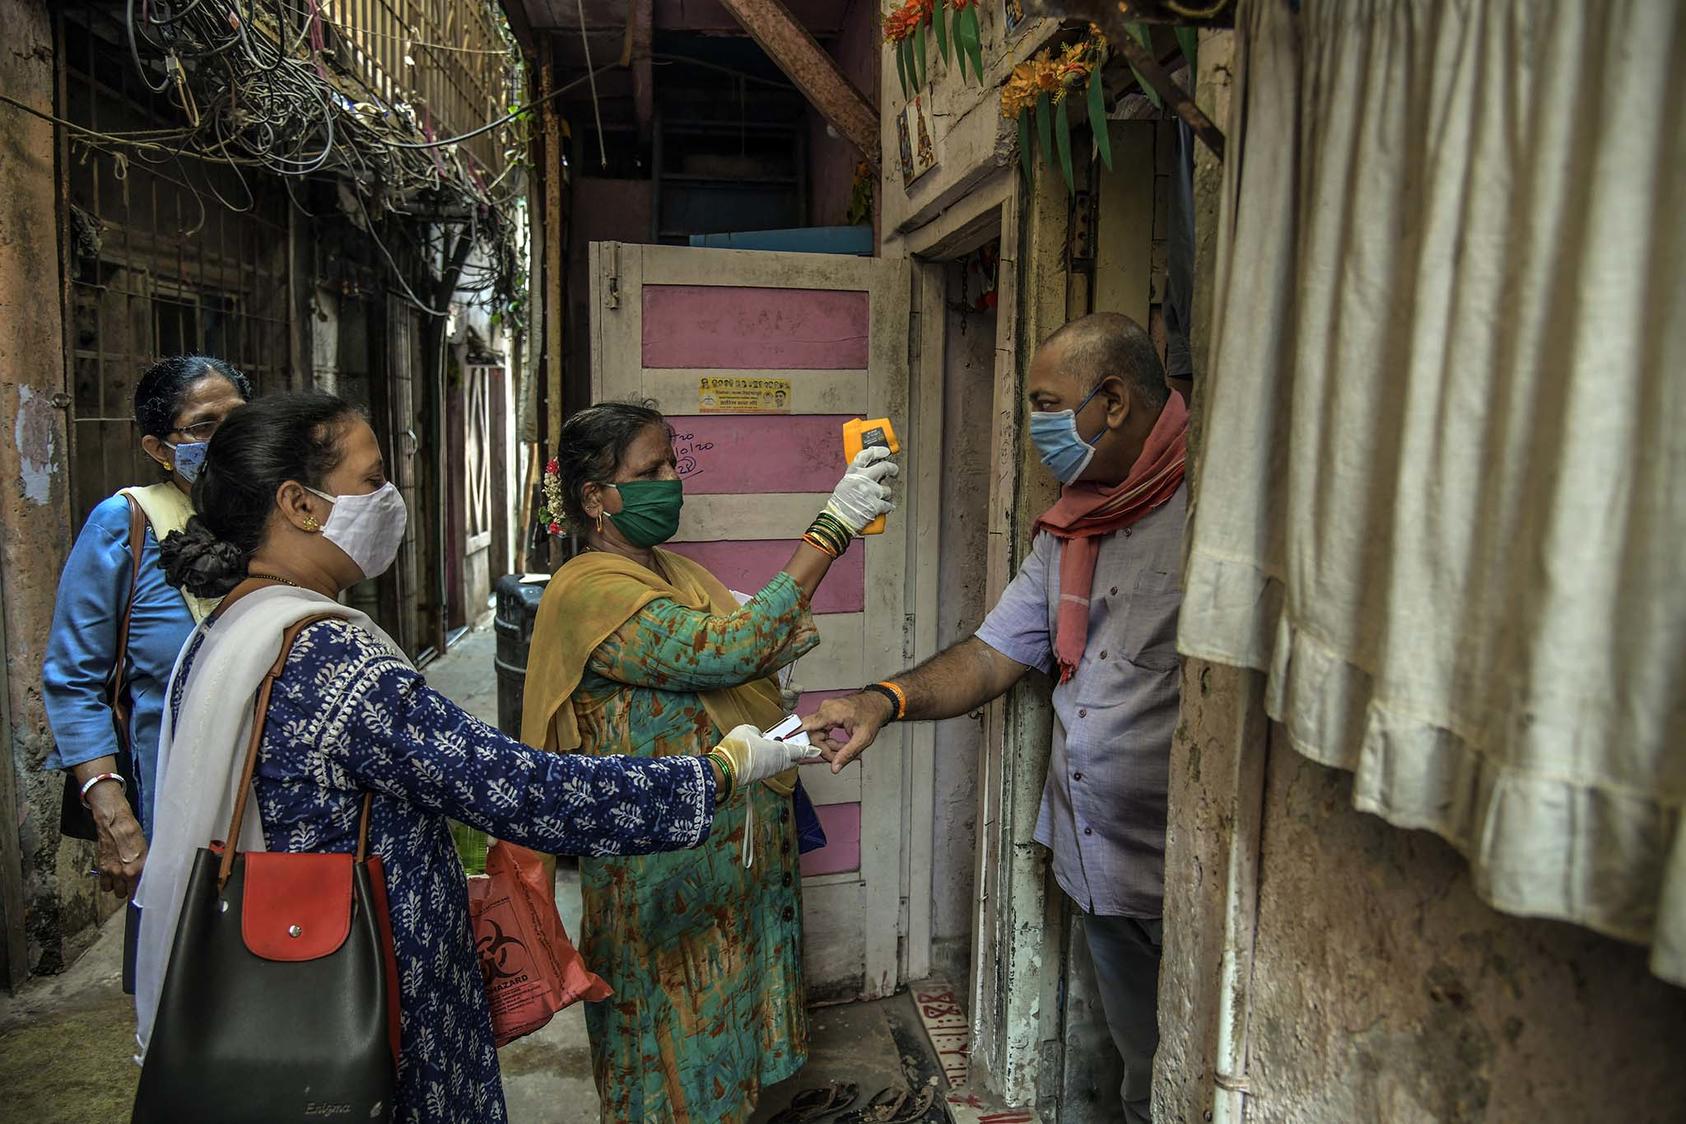 Health workers doing contact tracing check the body temperature and blood oxygen level of a man in Mumbai, India. April 15, 2021. (Atul Loke/The New York Times)